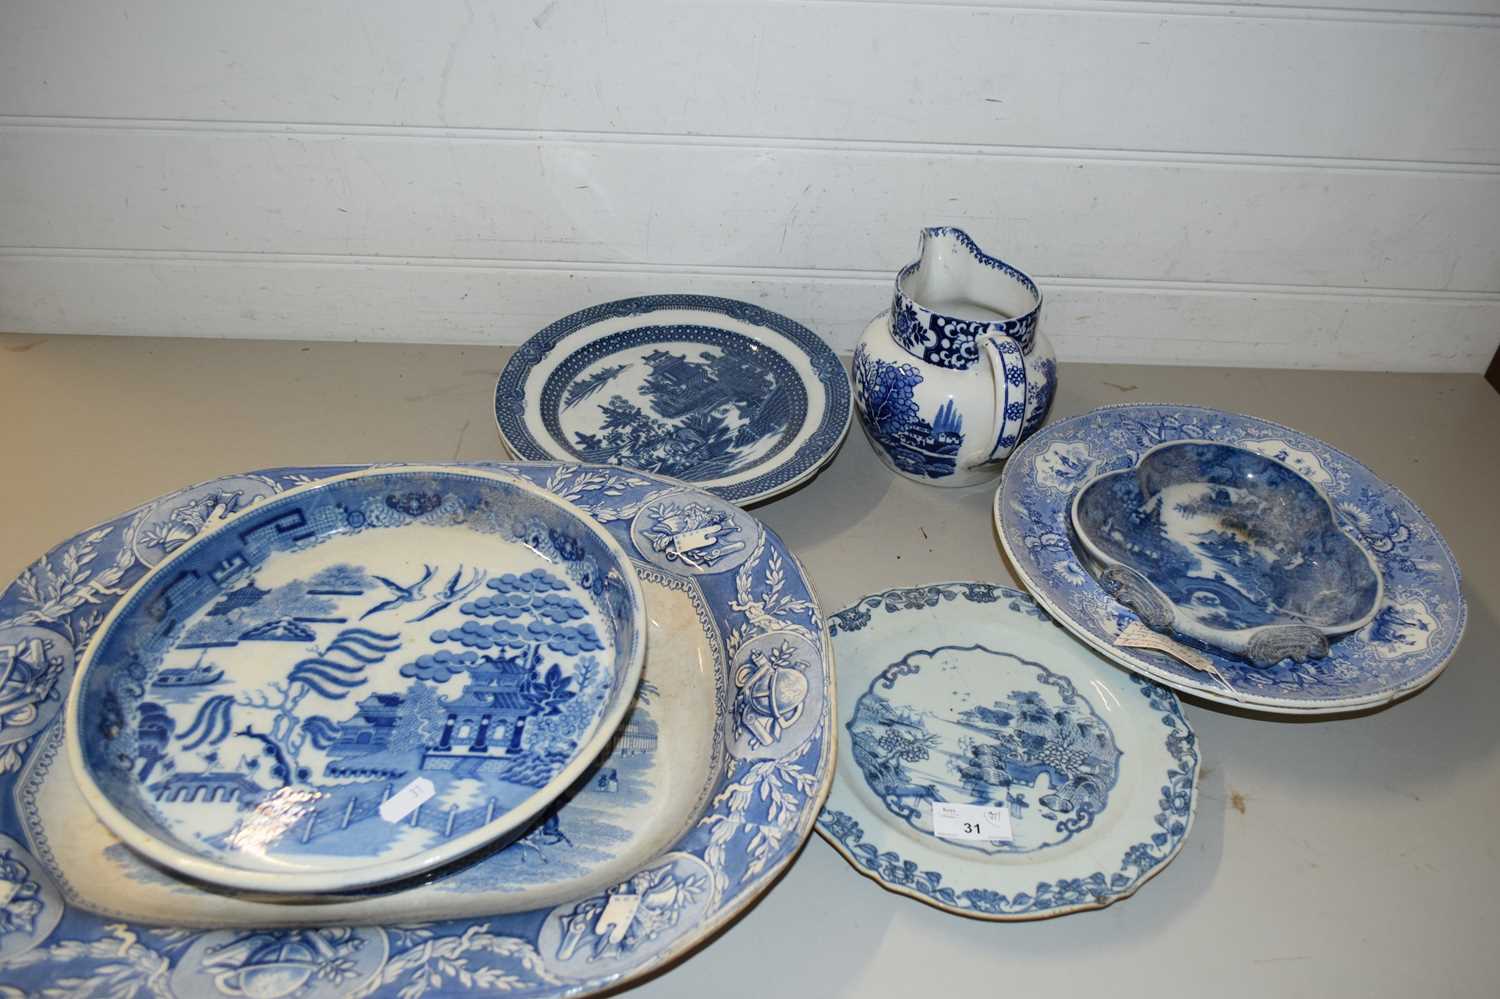 VARIOUS BLUE AND WHITE CERAMICS TO INCLUDE 18TH CENTURY CHINESE PLATE WITH STAPLED REPAIR, VICTORIAN